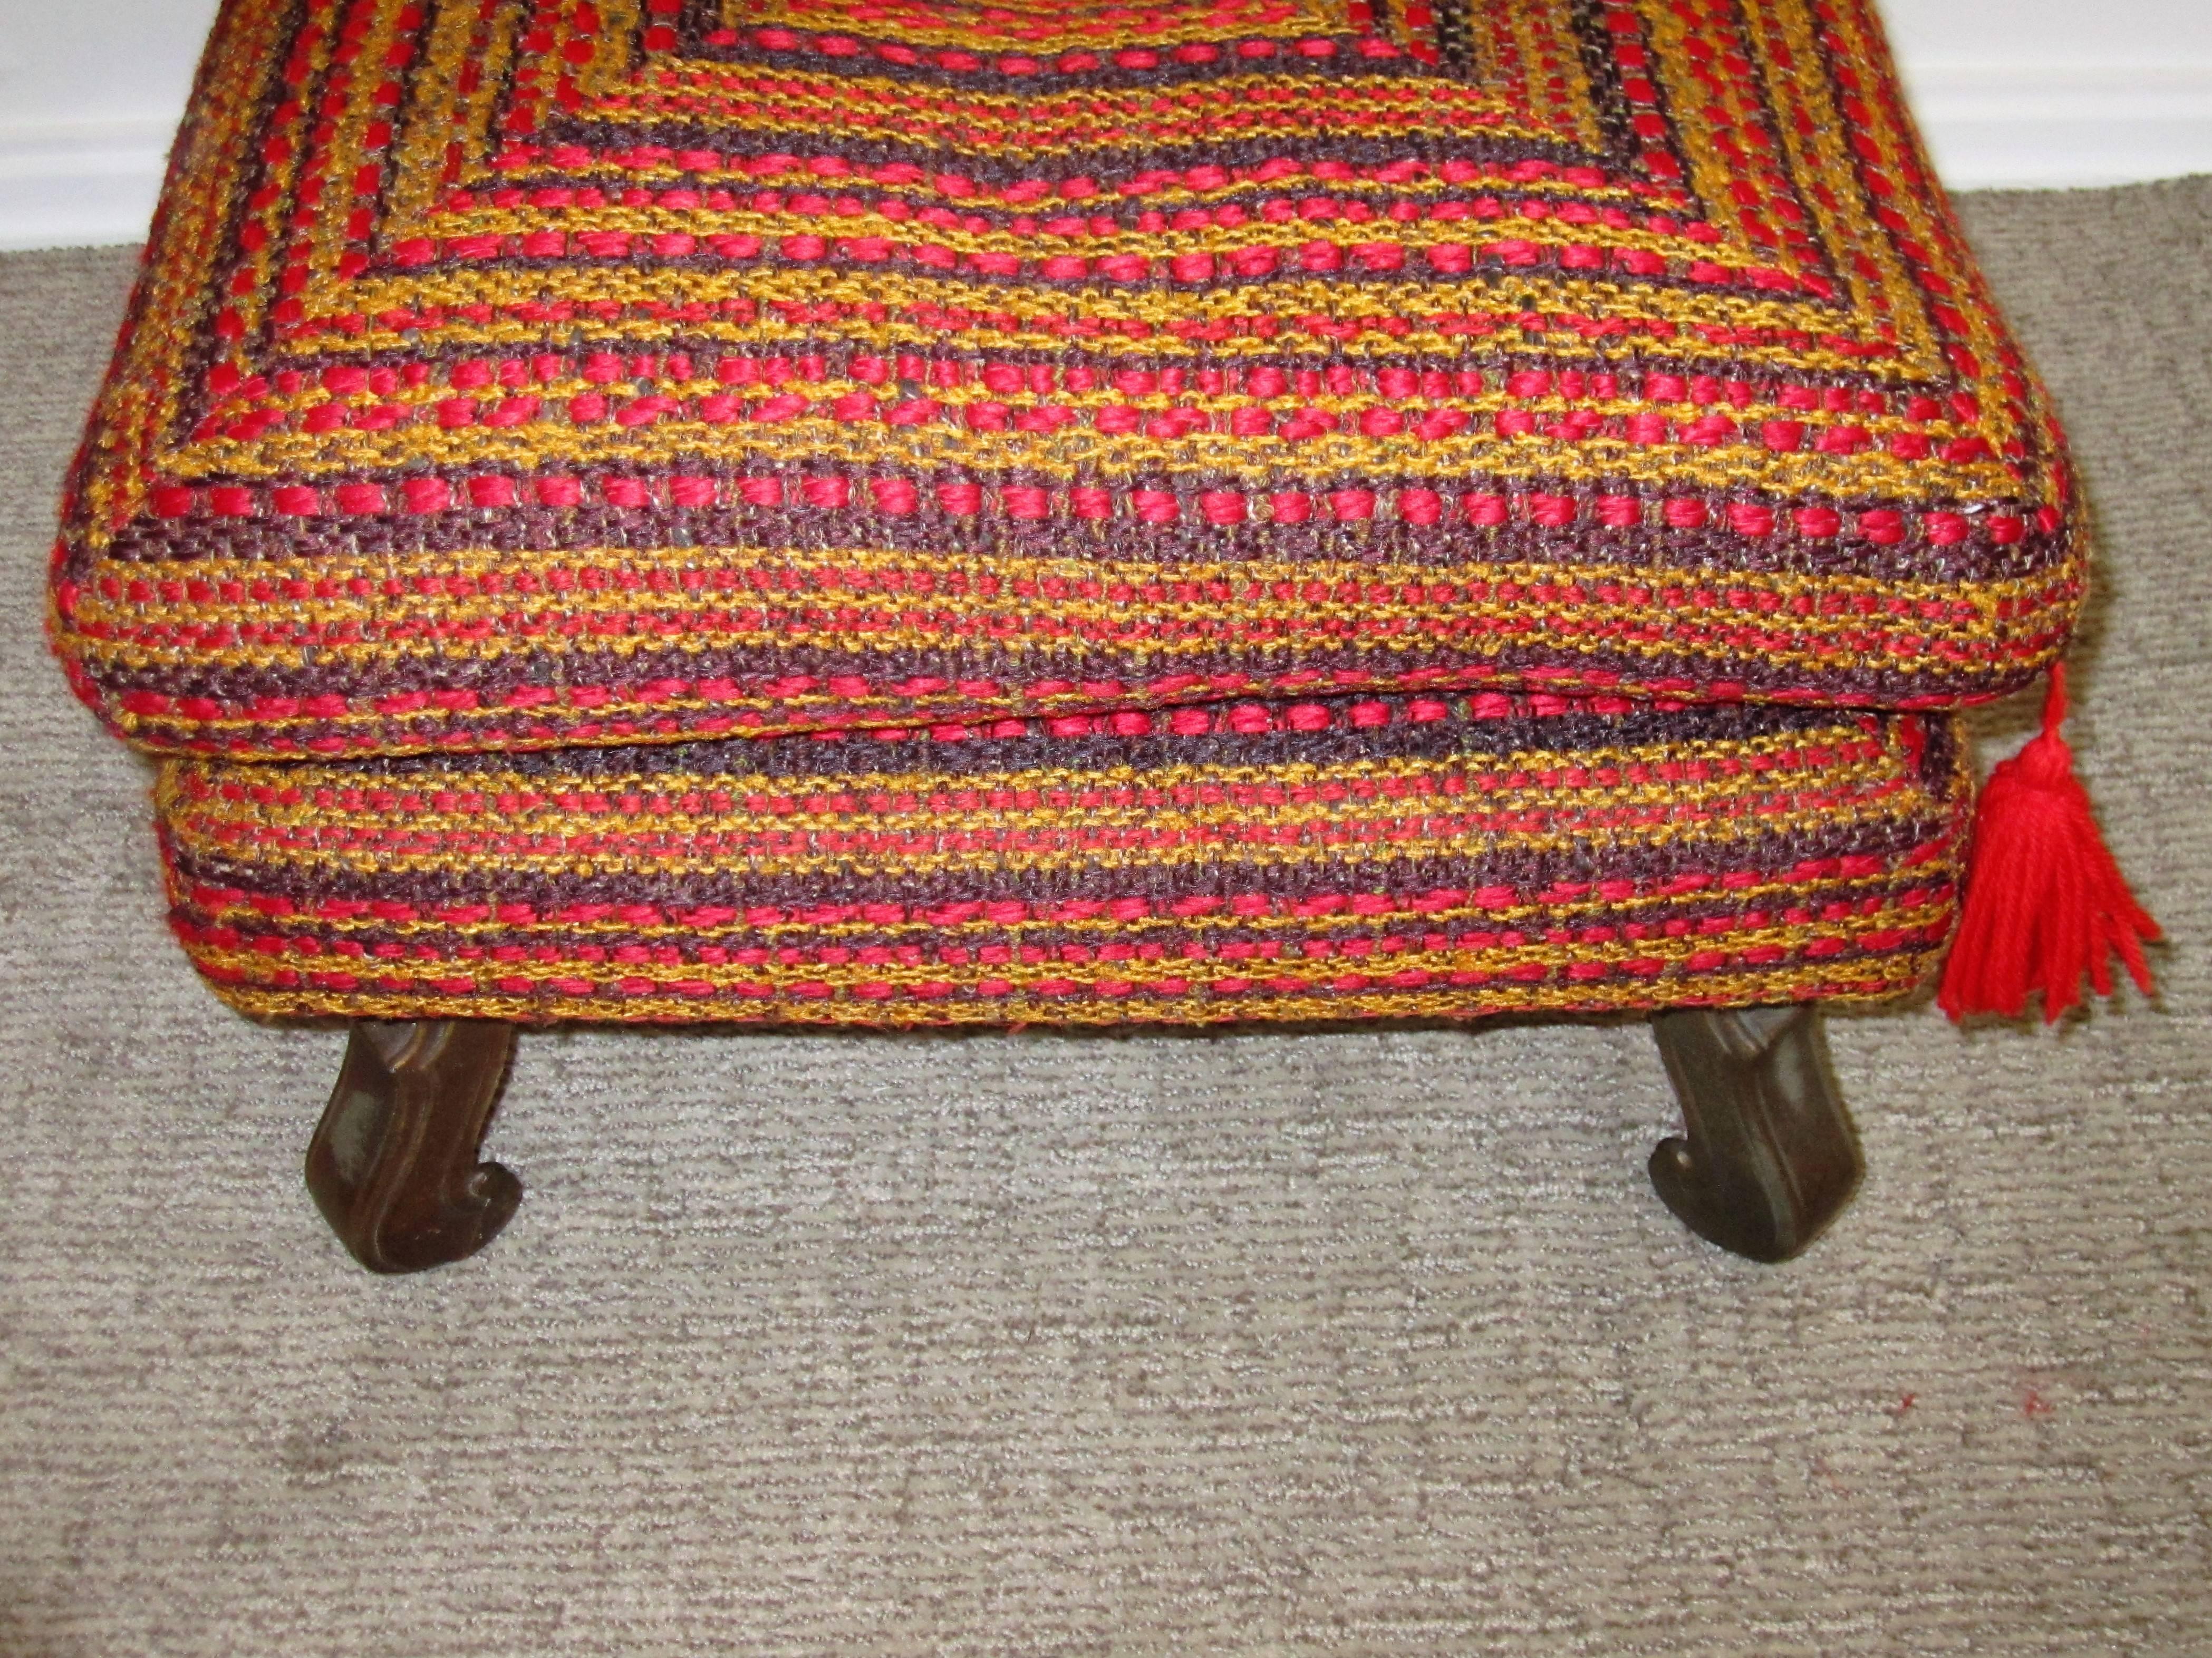 20th Century Midcentury Colorful Ottoman, Bench, or Stool